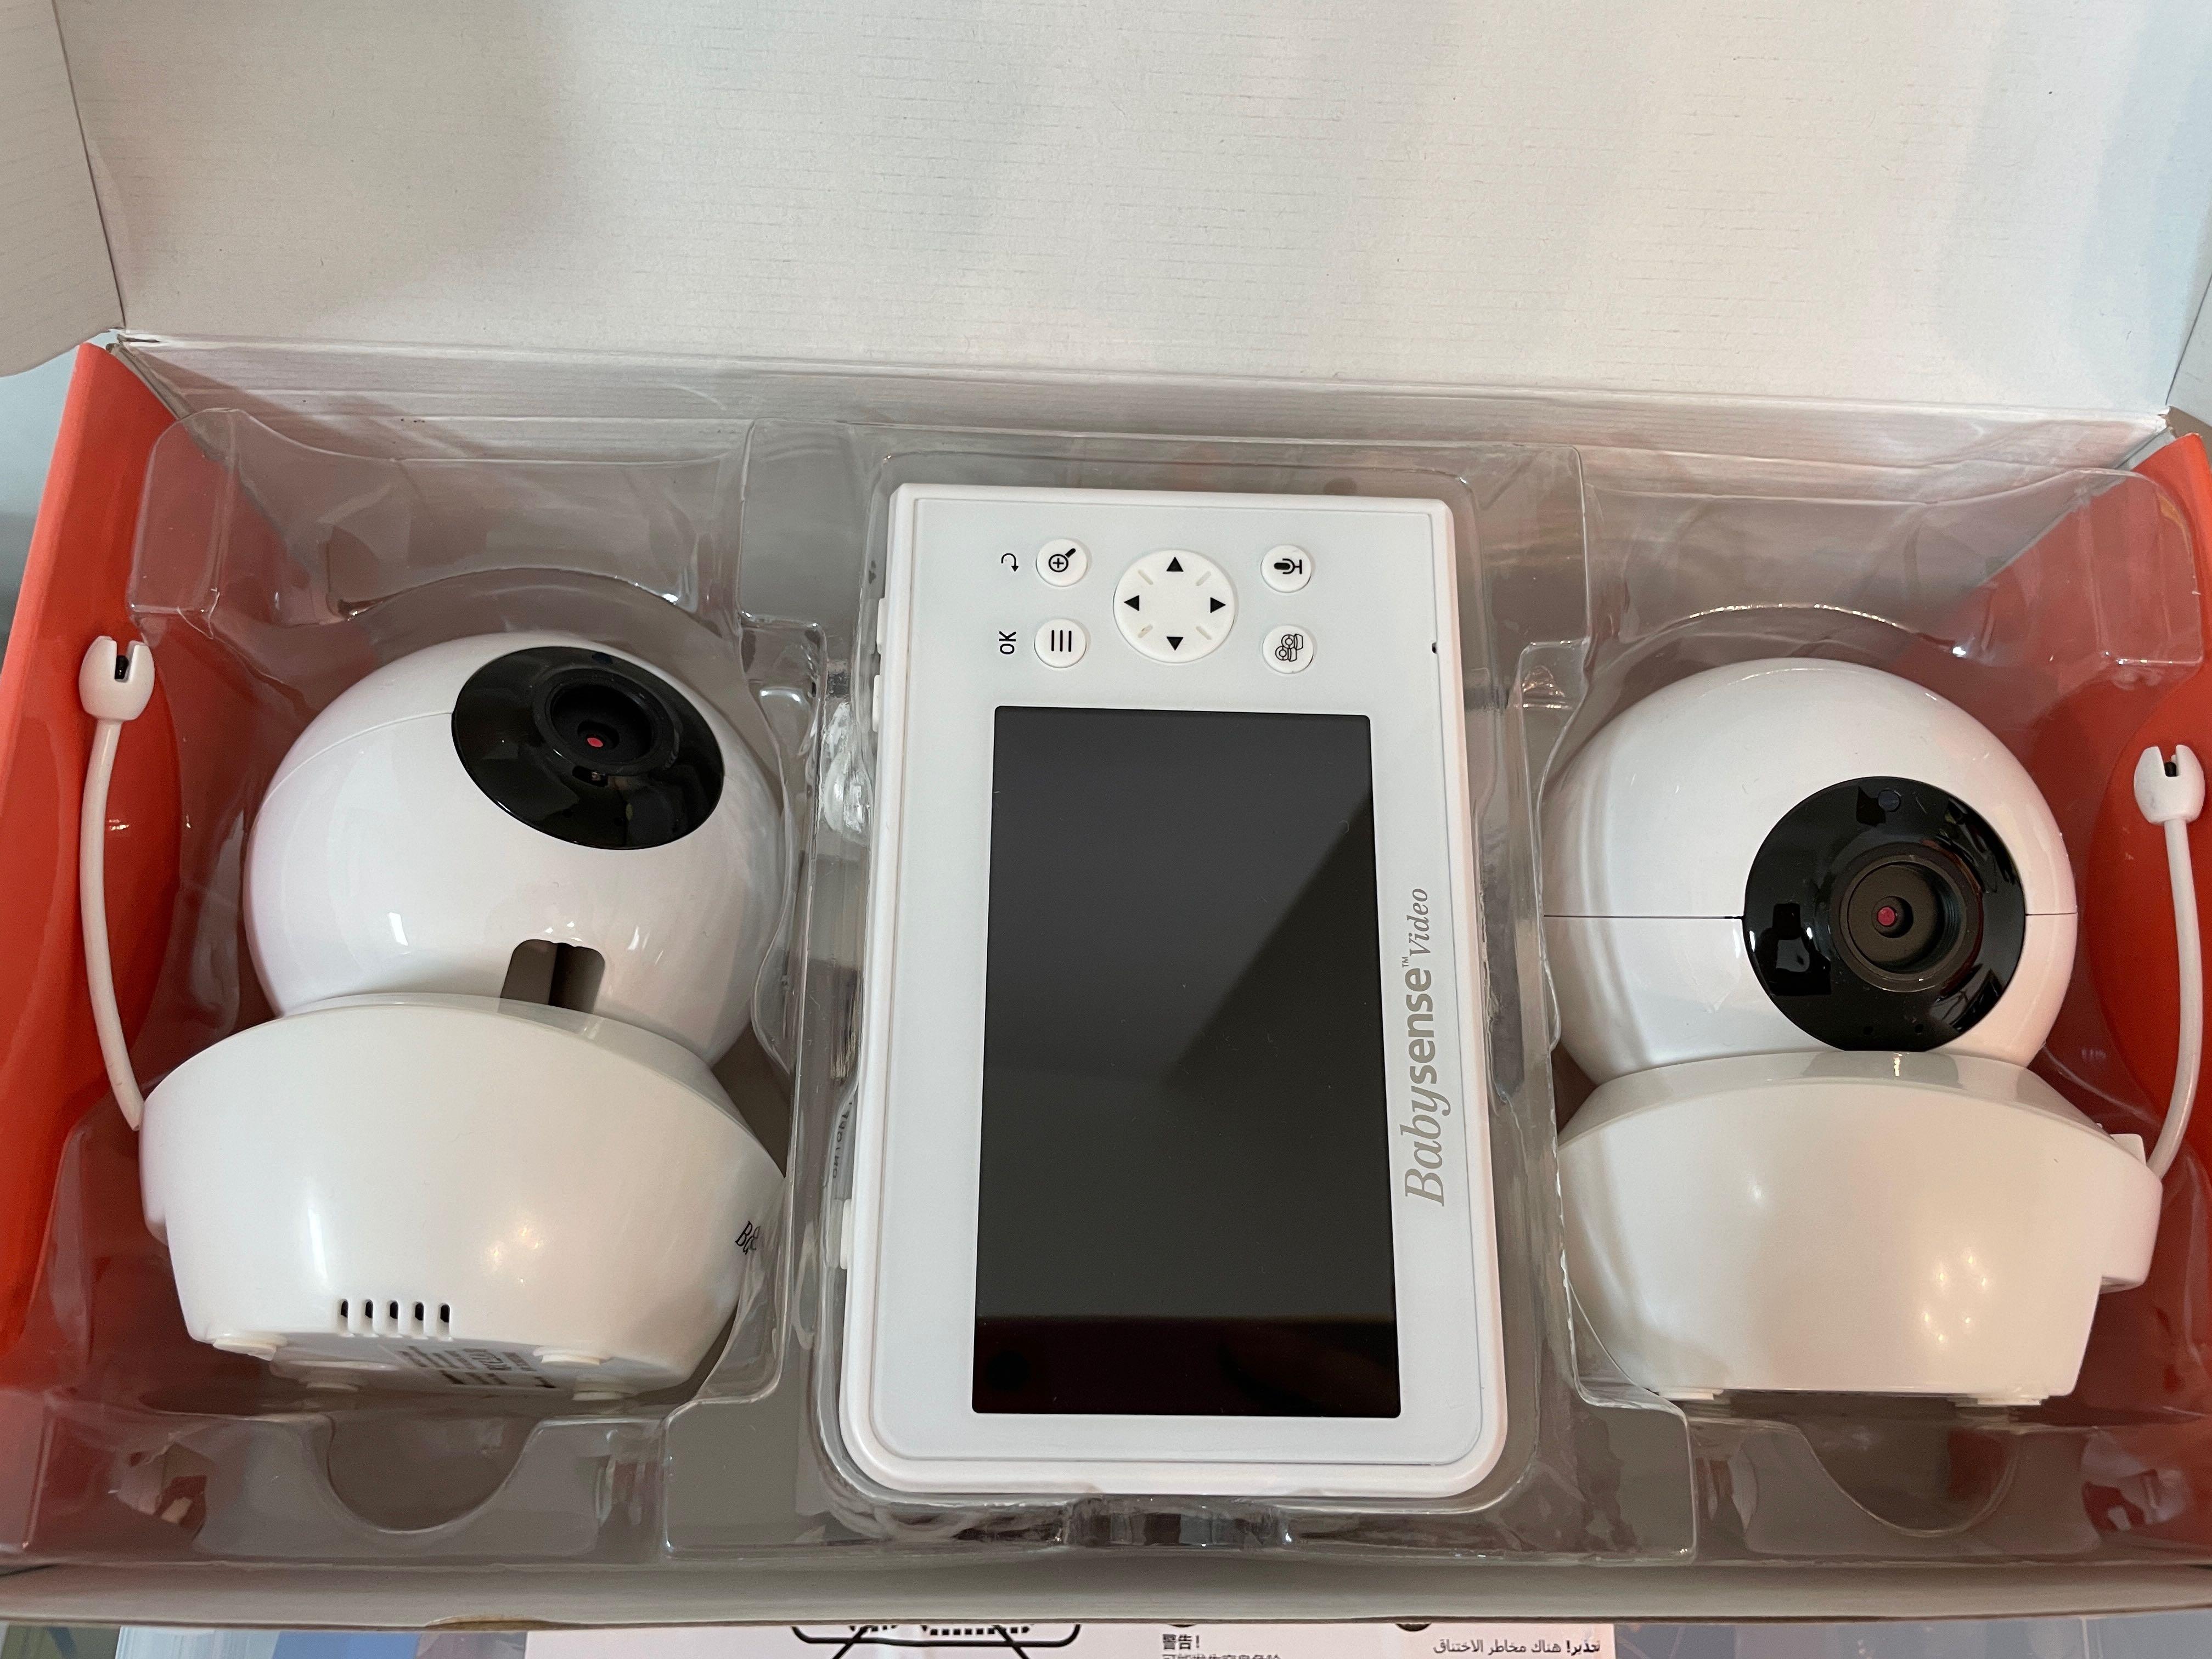 V43 - Video Baby Monitor with Cameras